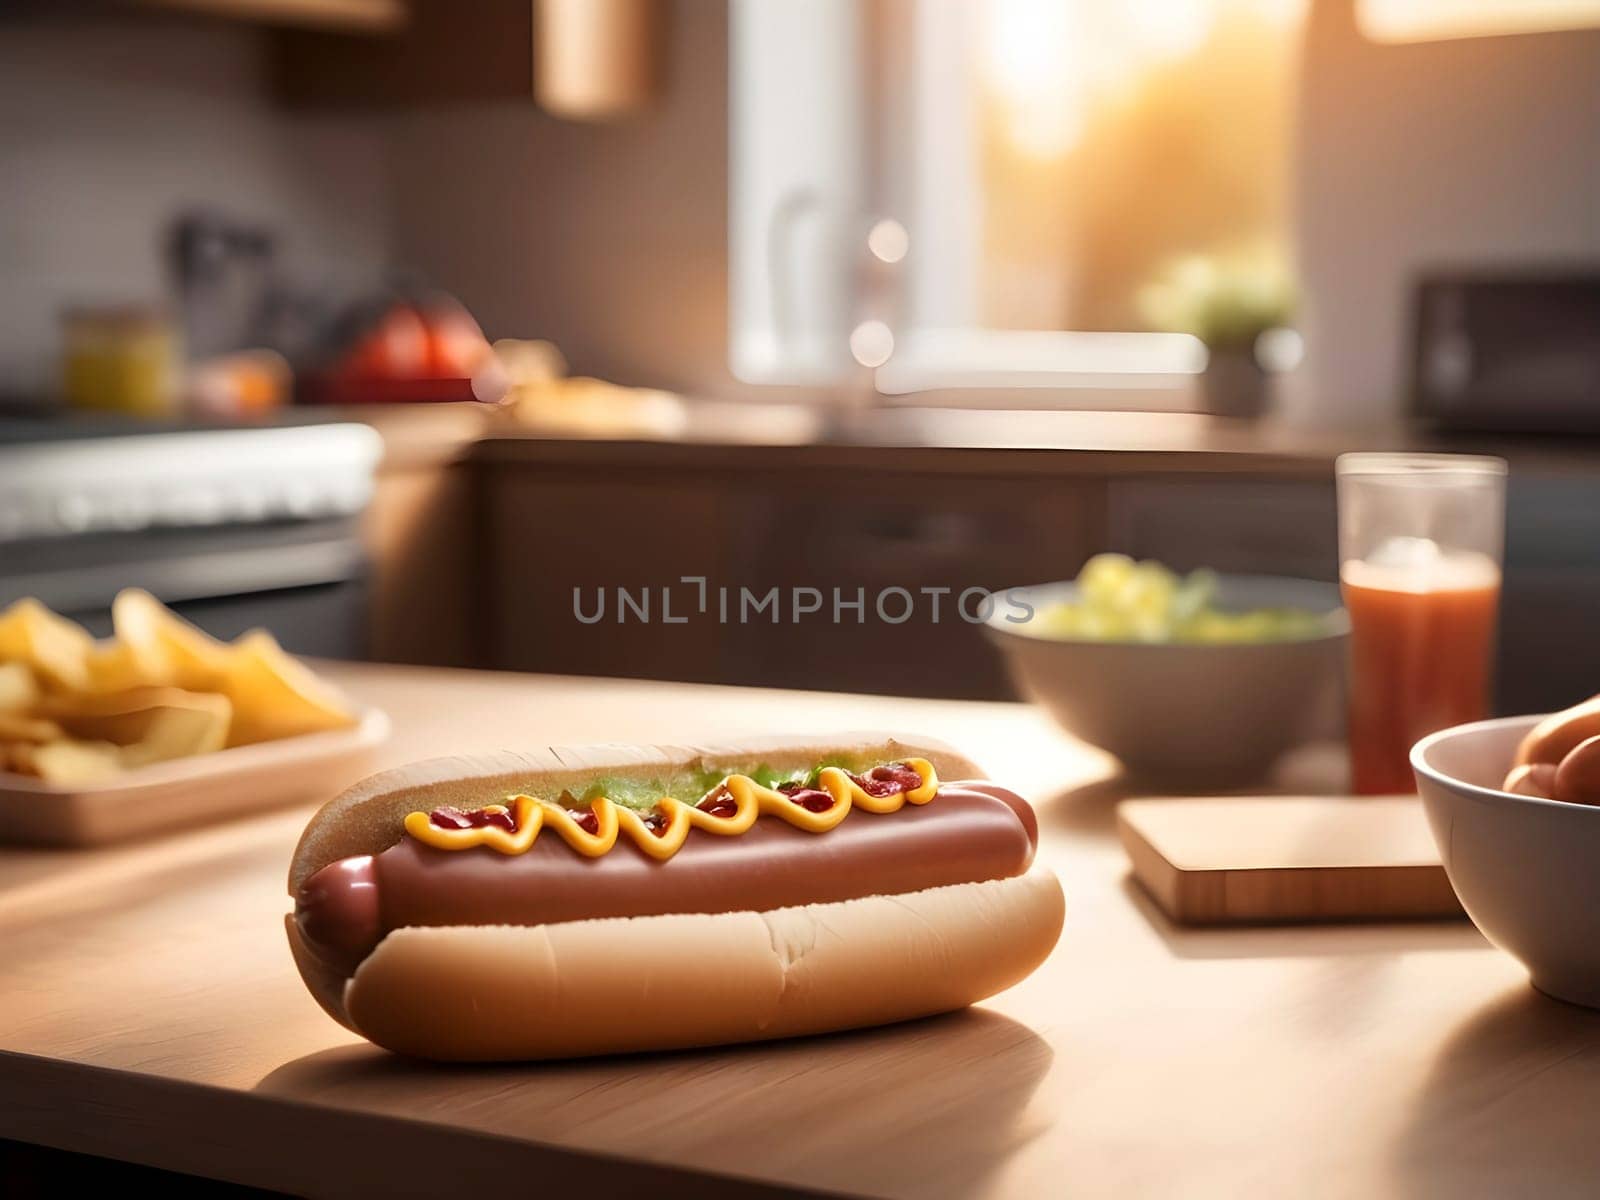 Kitchen Comfort: Hot Dog Spotlight in the Soft Glow of Afternoon Illumination by mailos